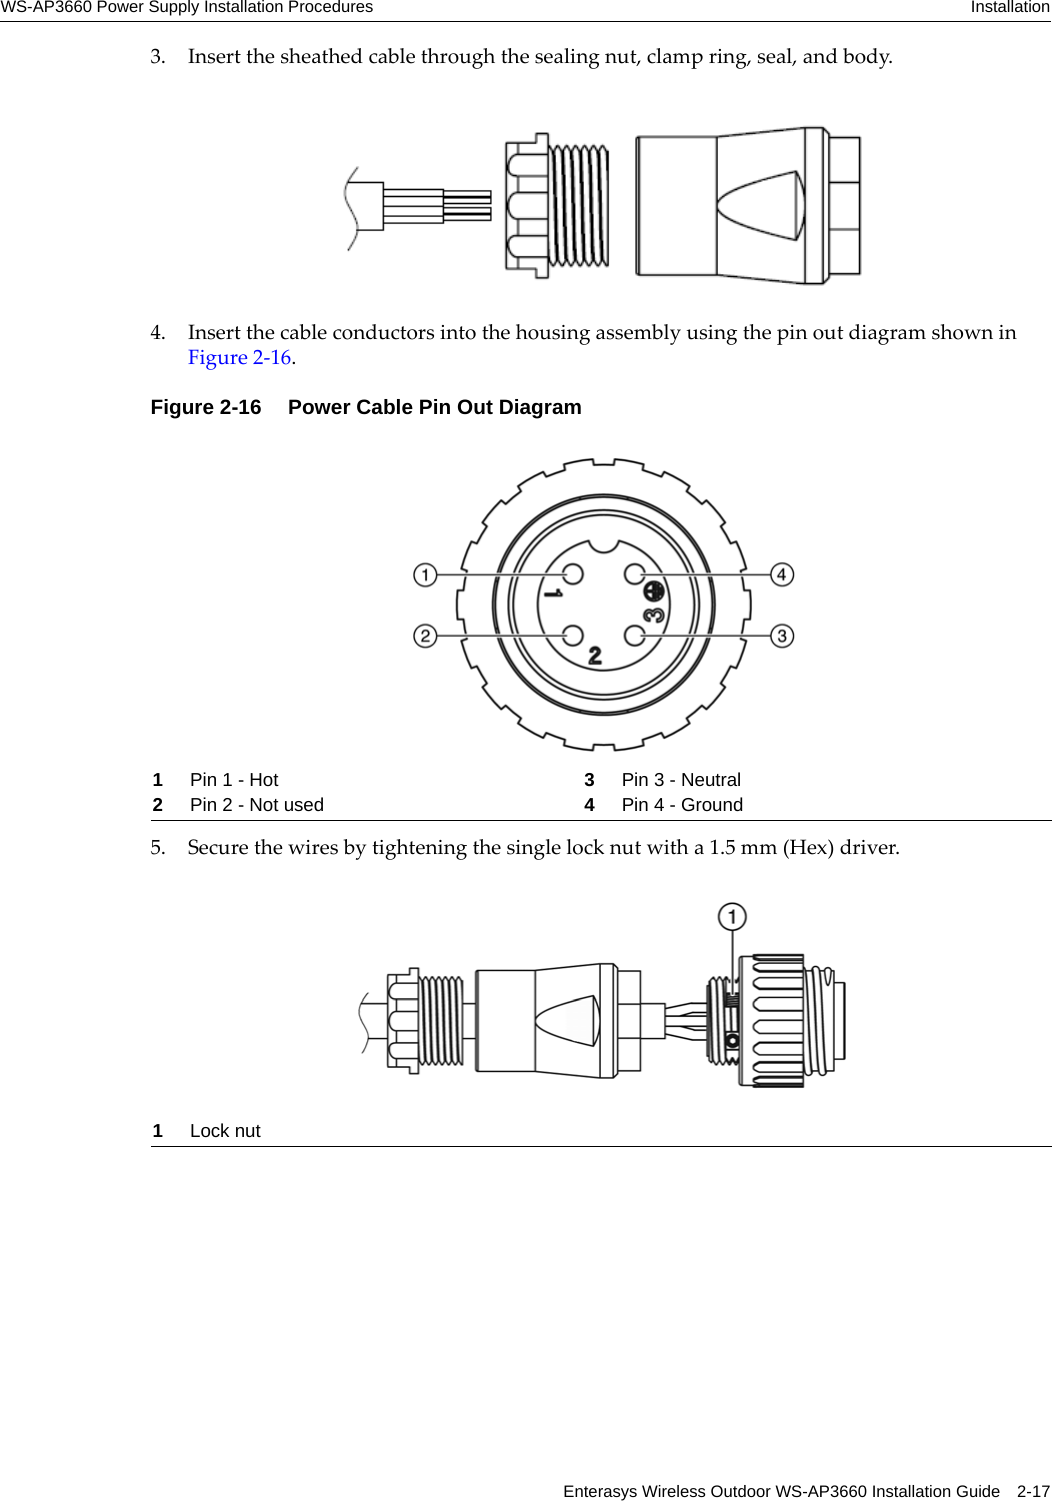 WS-AP3660 Power Supply Installation Procedures InstallationEnterasys Wireless Outdoor WS-AP3660 Installation Guide 2-173. Insert the sheathed cable through the sealing nut, clamp ring, seal, and body.4. Insert the cable conductors into the housing assembly using the pin out diagram shown in Figure 2-16.Figure 2-16  Power Cable Pin Out Diagram5. Secure the wires by tightening the single lock nut with a 1.5 mm (Hex) driver.1Pin 1 - Hot 3Pin 3 - Neutral2Pin 2 - Not used 4Pin 4 - Ground1Lock nut